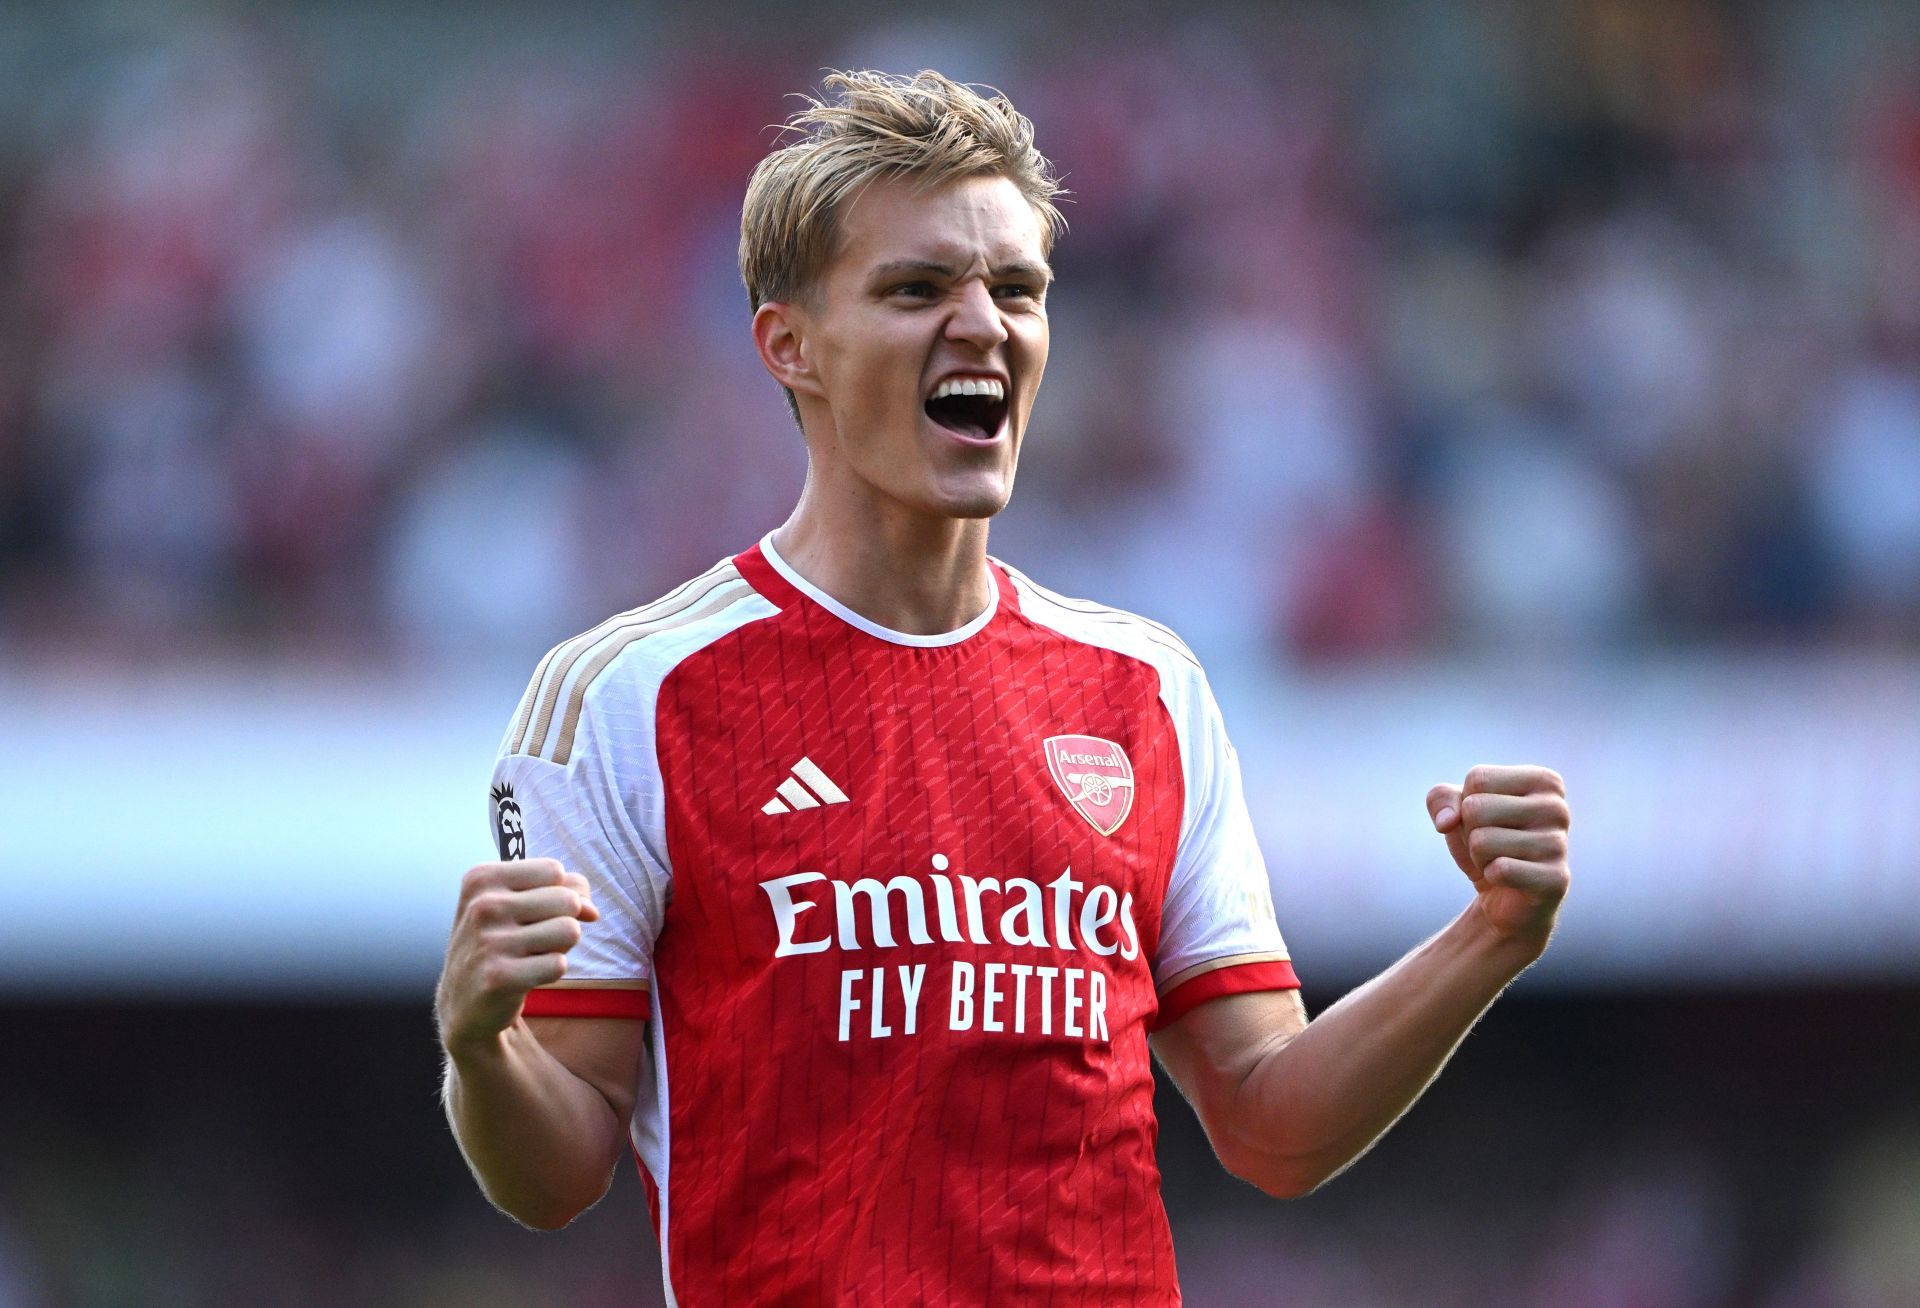 Martin Odegaard has excelled as Gunners captain.